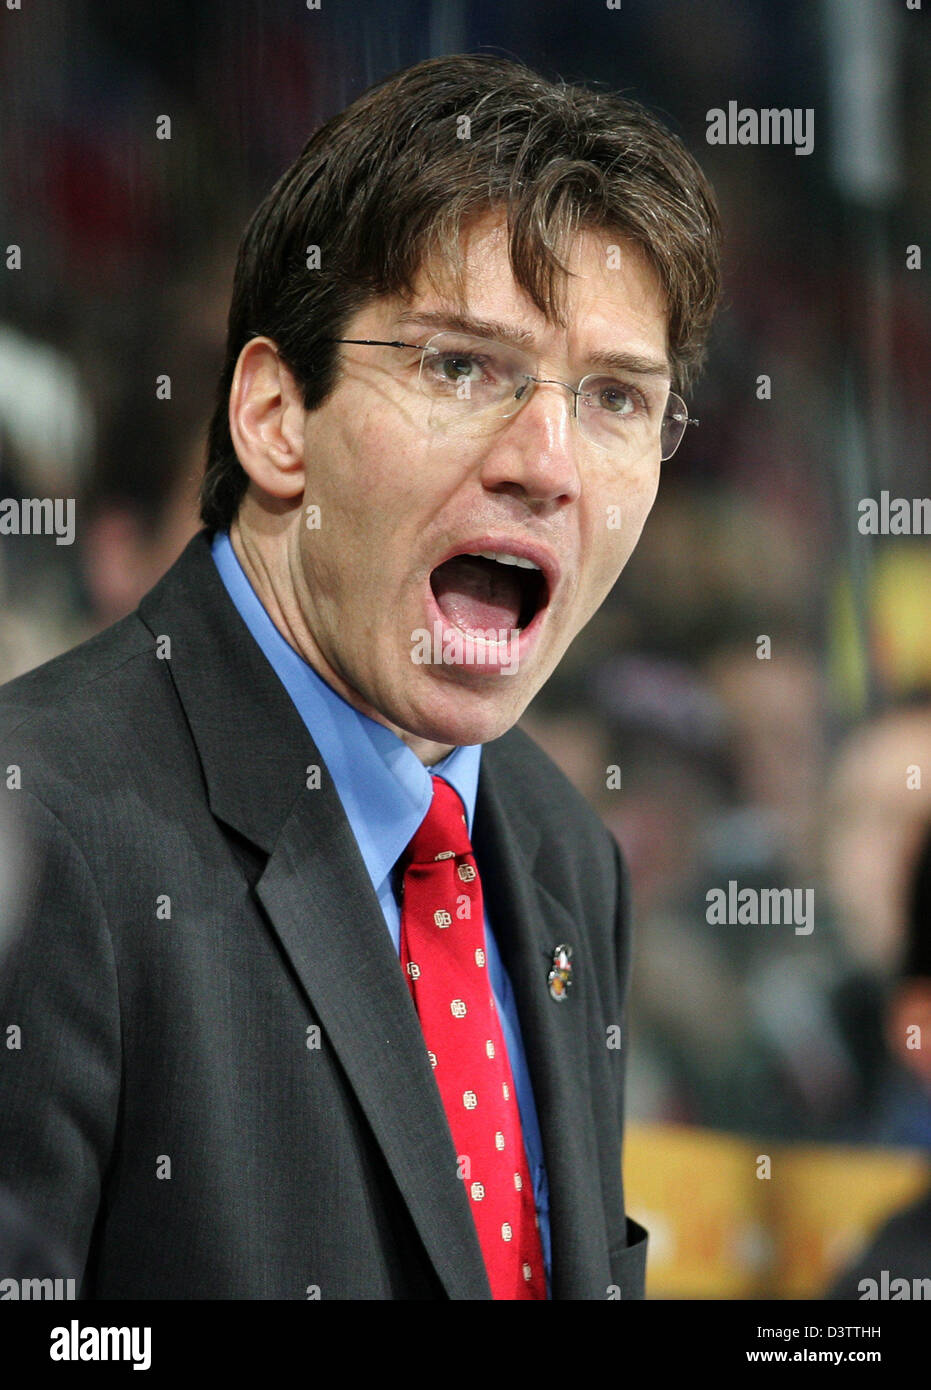 The photo shows German ice hockey national team head coach Uwe Krupp during the match Germany vs Switzerland at the TUI Arena in Hanover, Germany, Sunday, 12 November 2006. Germany, Canada, Latvia, Japan, Slovakia and Switzerland take on each other during the four-day cup. Photo: Rainer Jensen Stock Photo